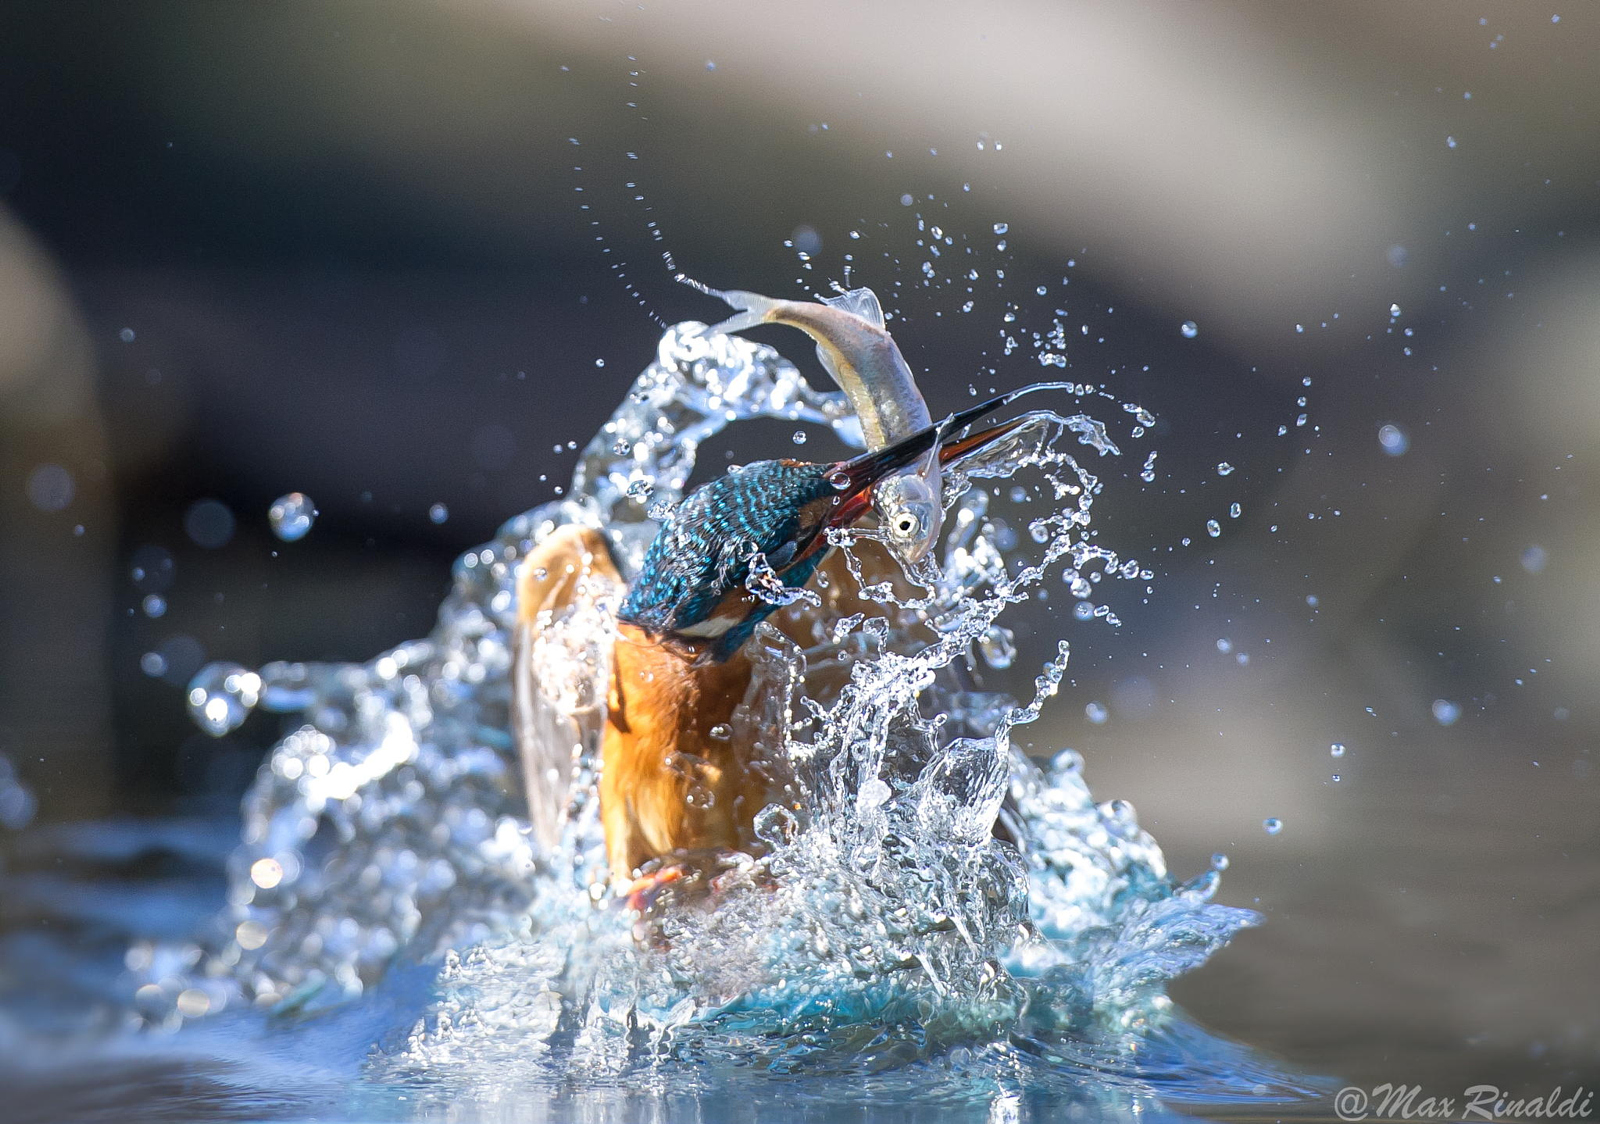 25 National Geographic-Worthy Photos of Kingfishers